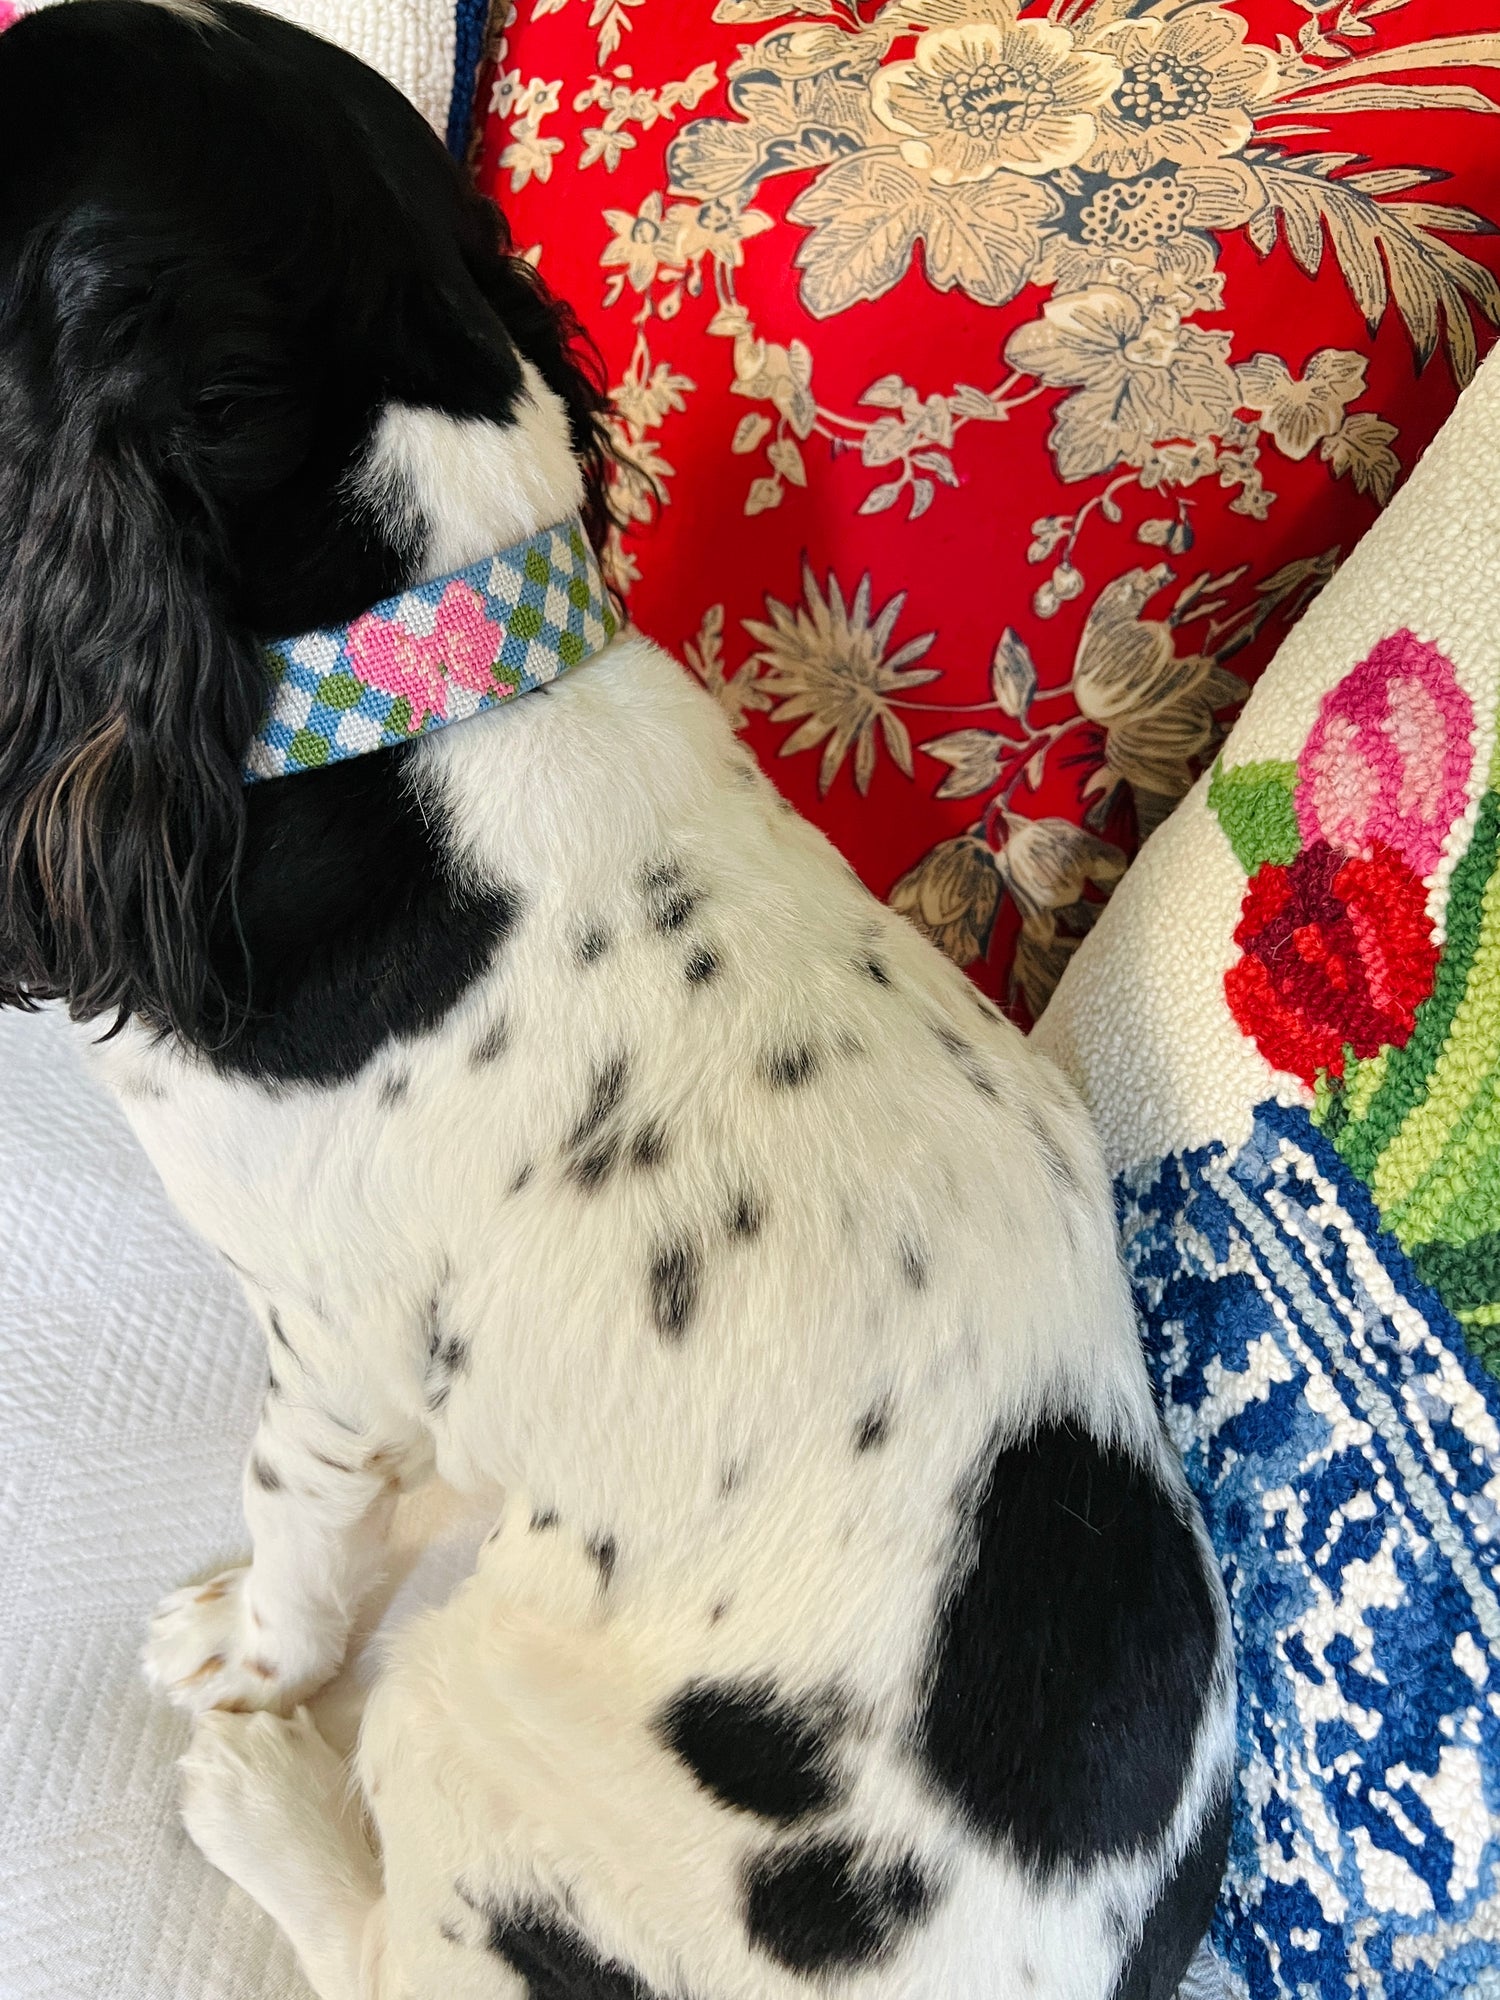 Needlepoint and leather dog collars